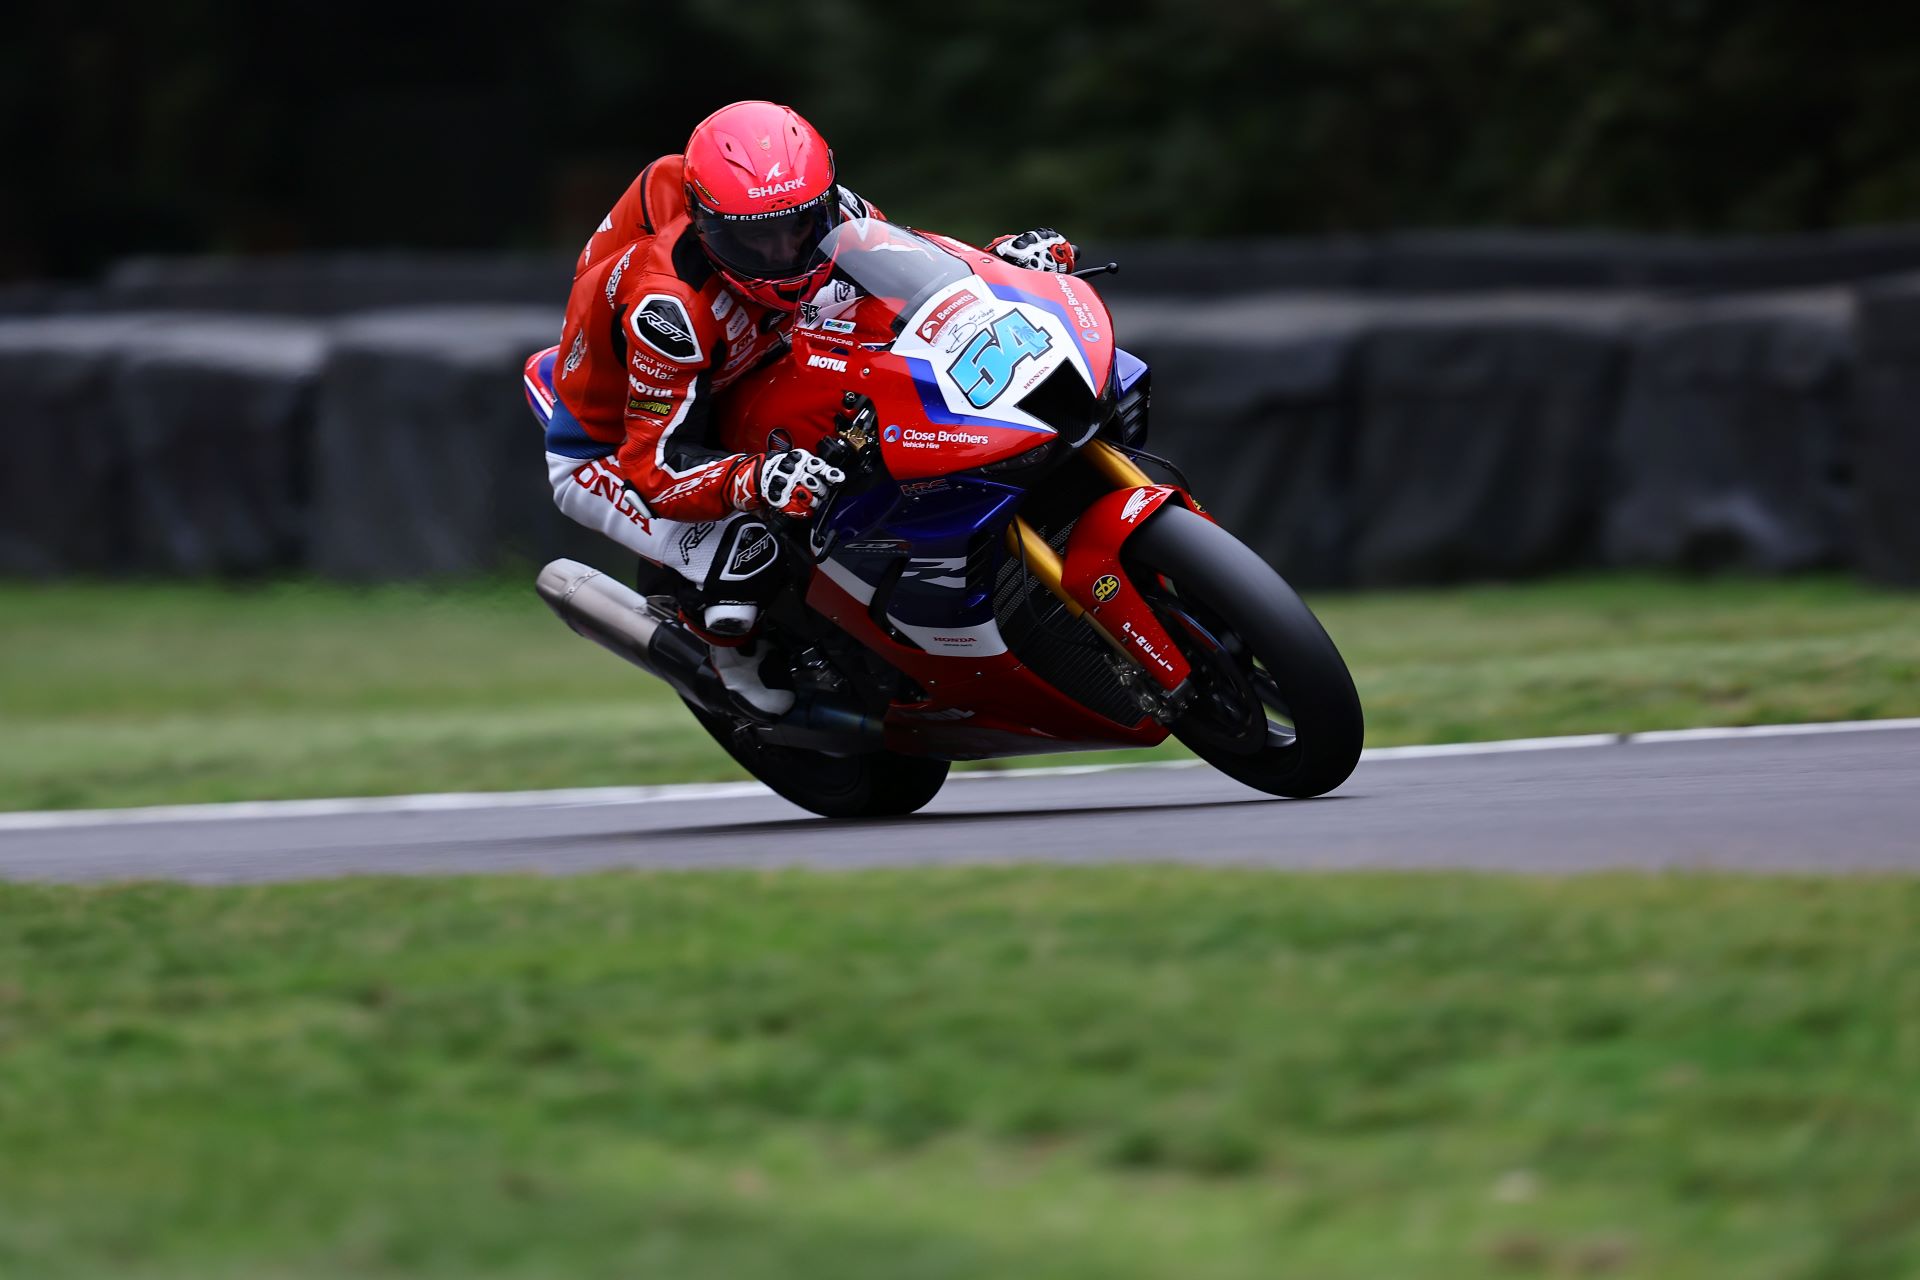 A challenging day at Oulton Park for Honda Racing